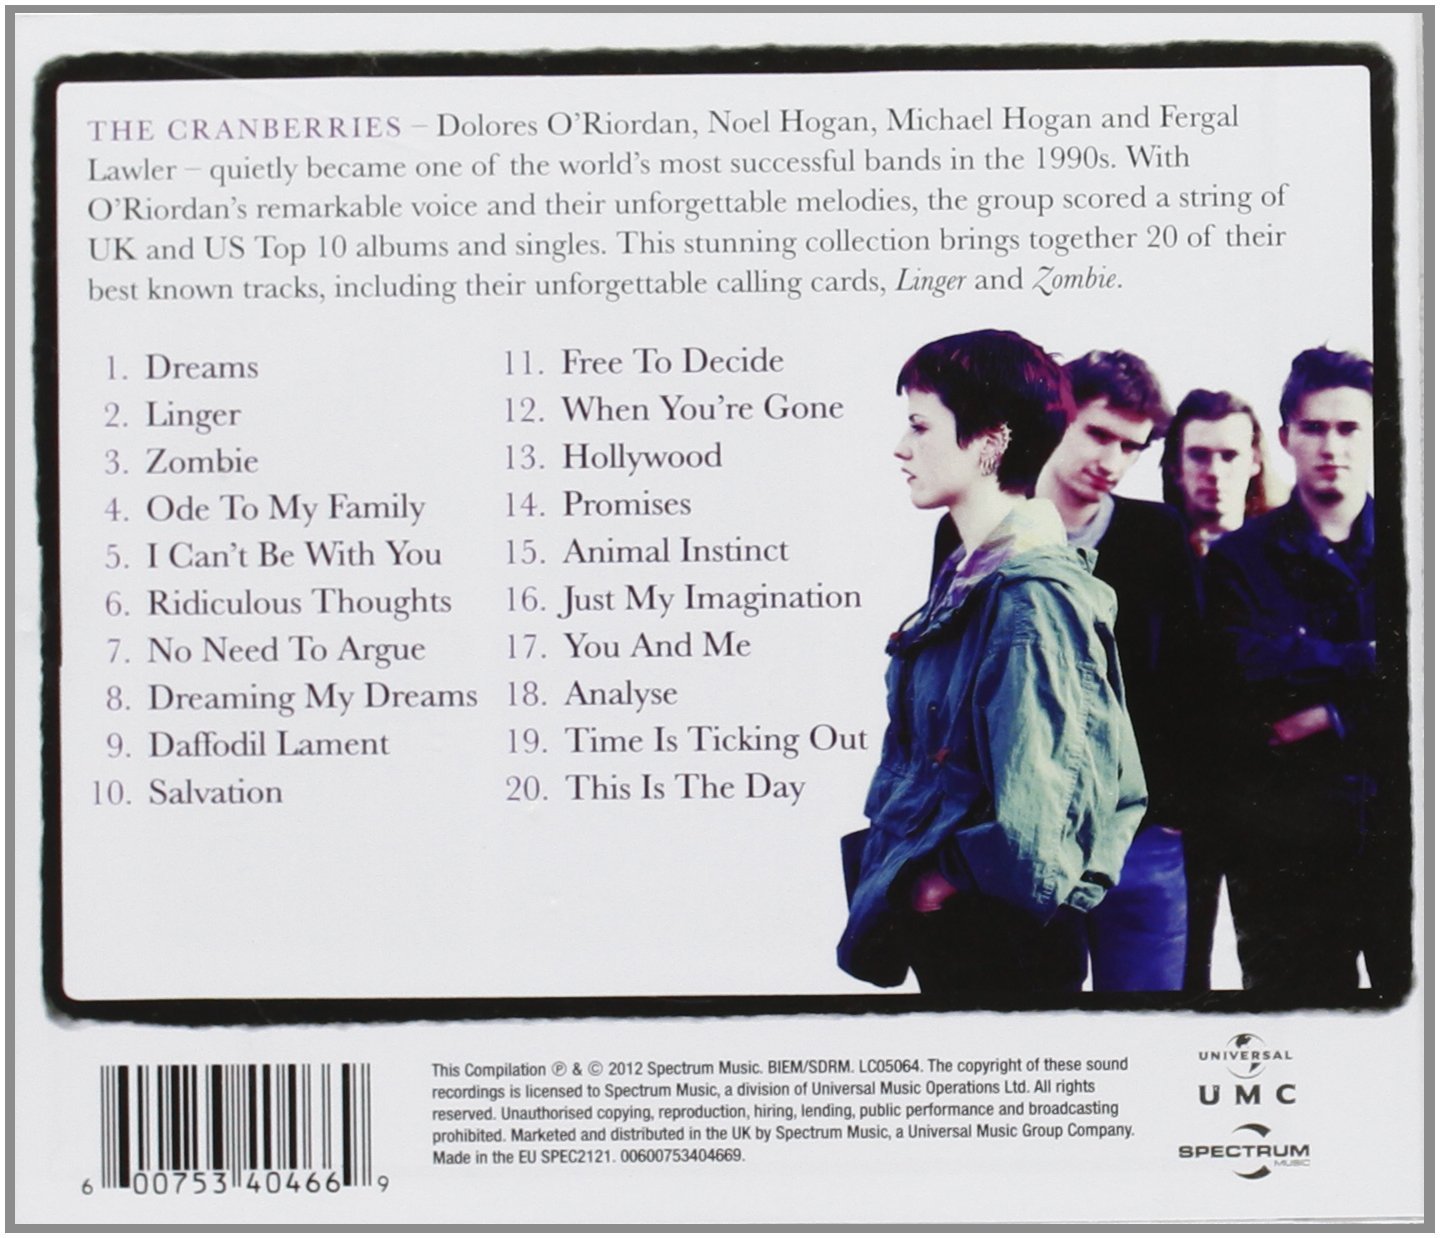 New greatest hits: “Dreams The Collection” | Cranberries World